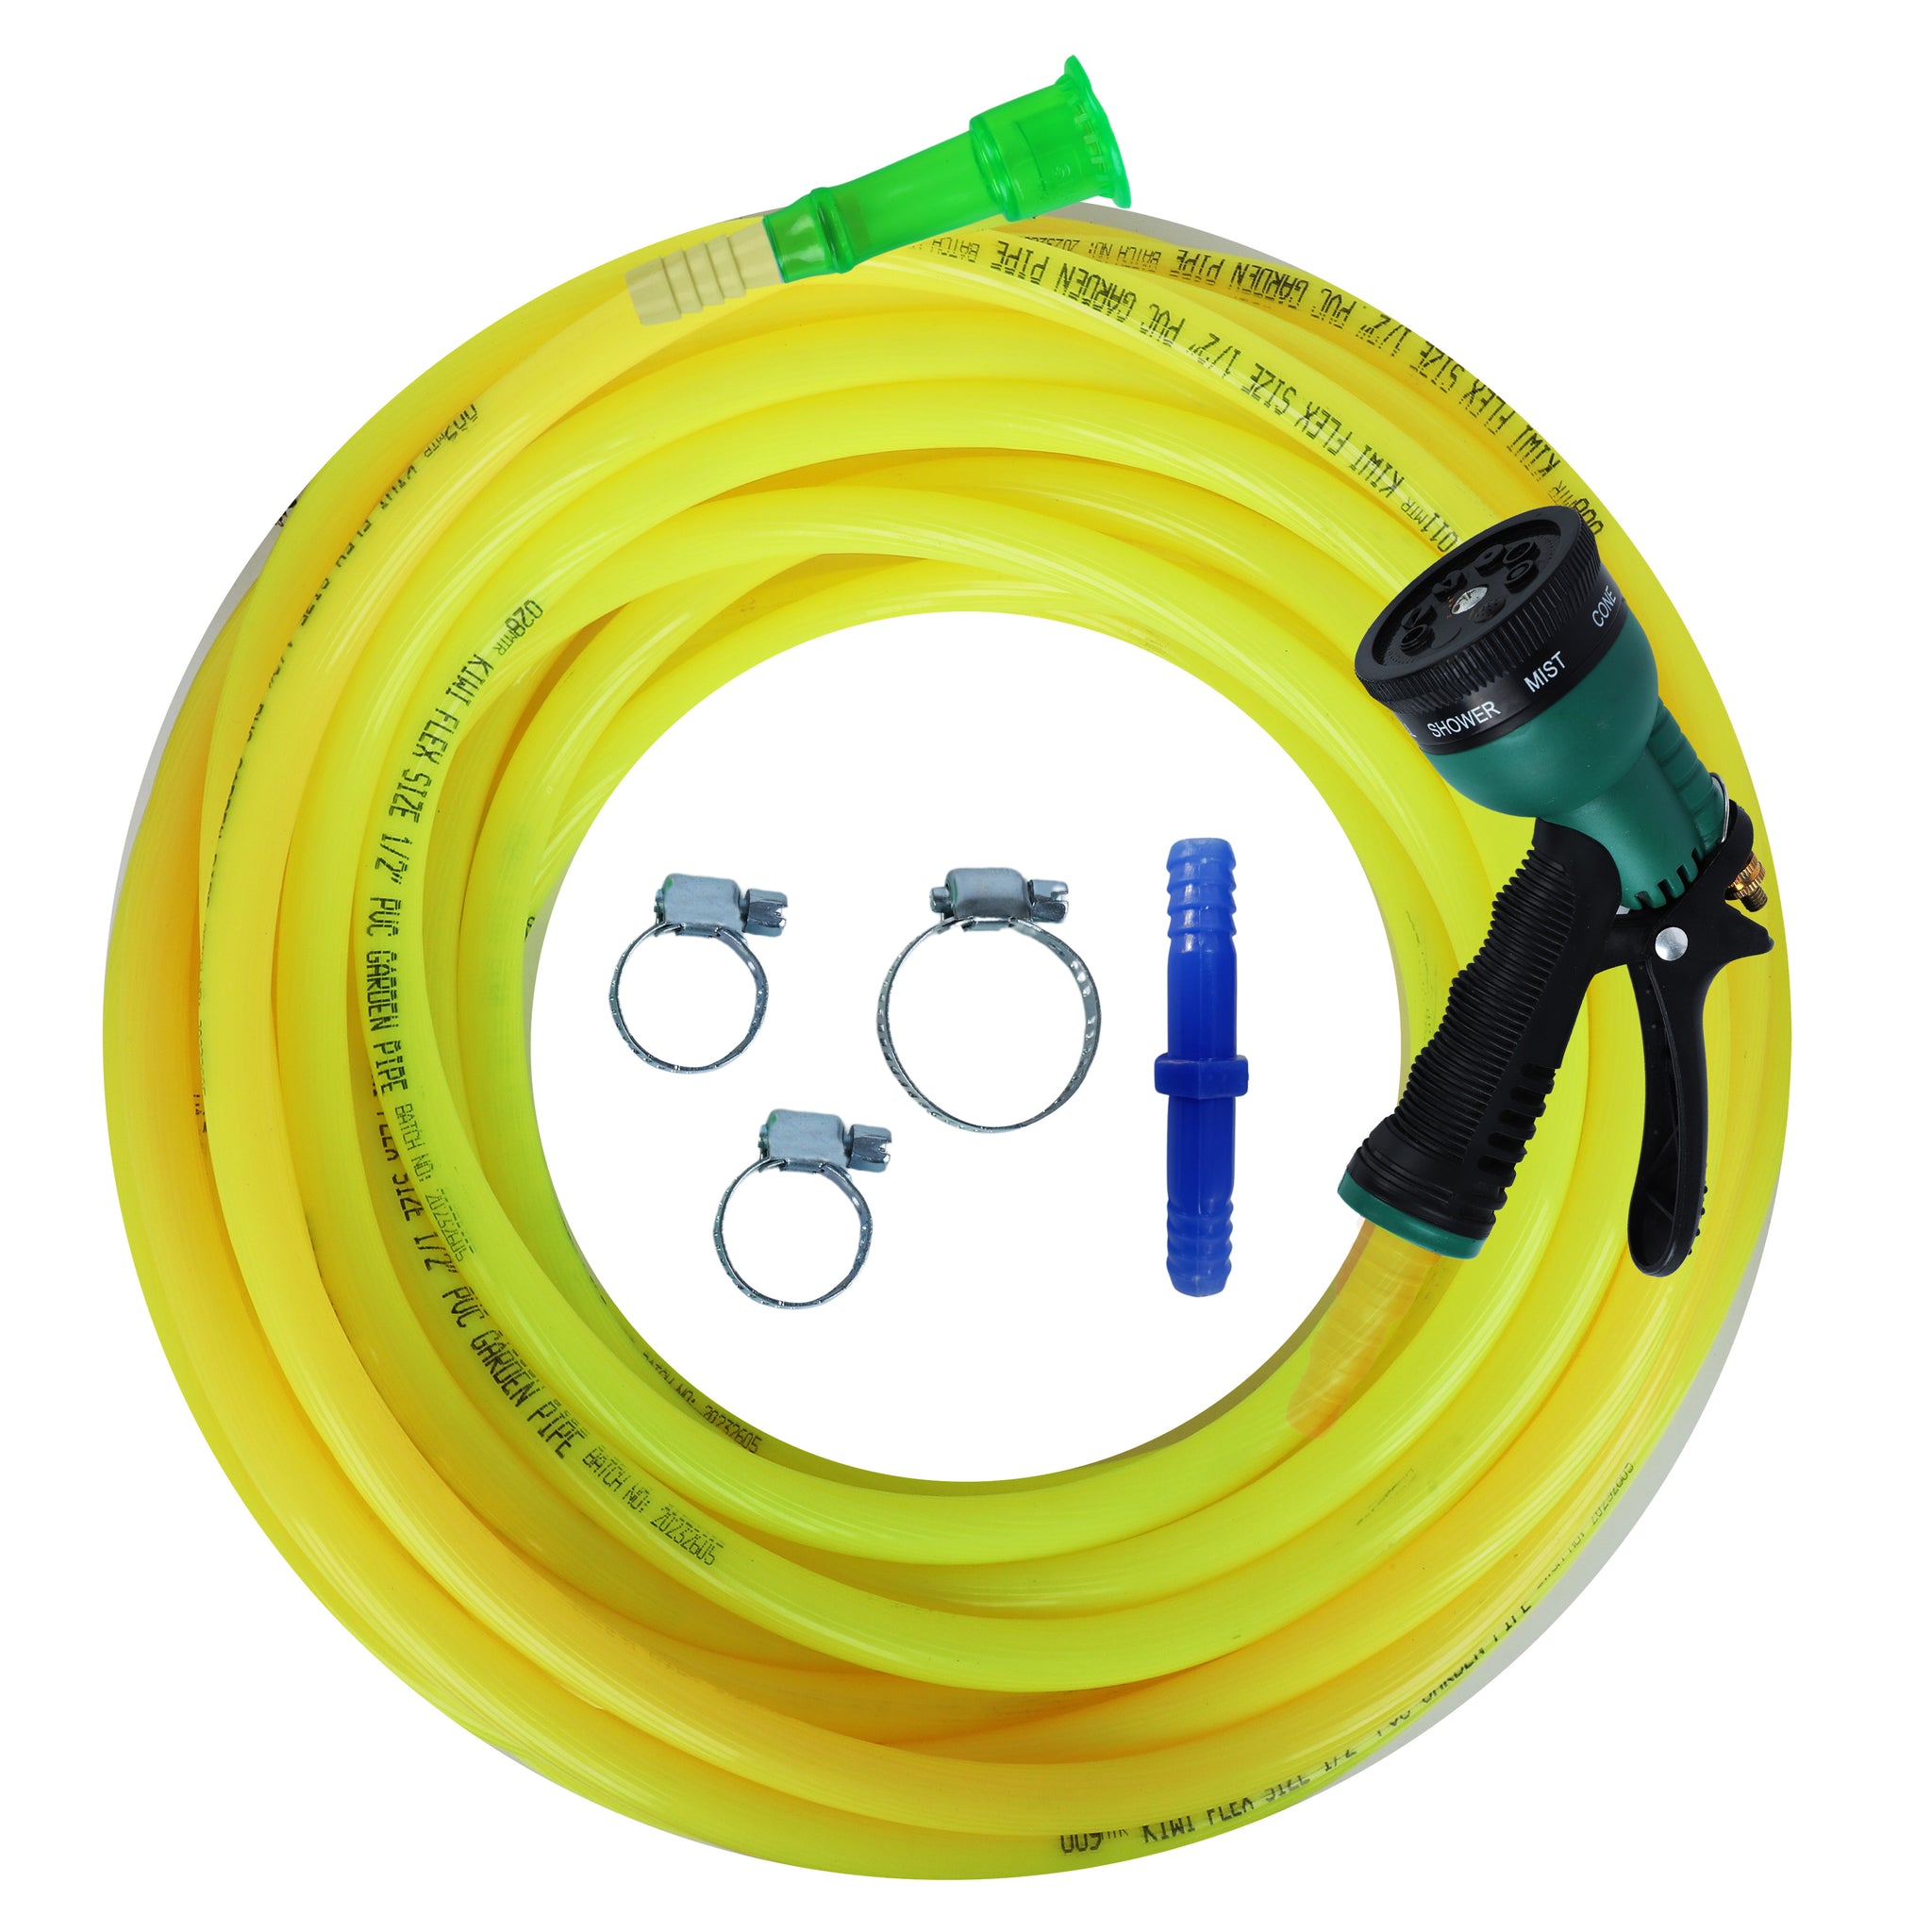 Utkarsh PVC Colour Petrol Garden Water Hose Pipe (Size: 1/2") with 8 Pattern Nozzle Sprayer, 1 Tap Adapter, Connector & 3 Clamps for Garden, Car Wash, Floor Clean, Pet Bath, Easy to Connect Indoor/Outdoor Use (Multicolour)